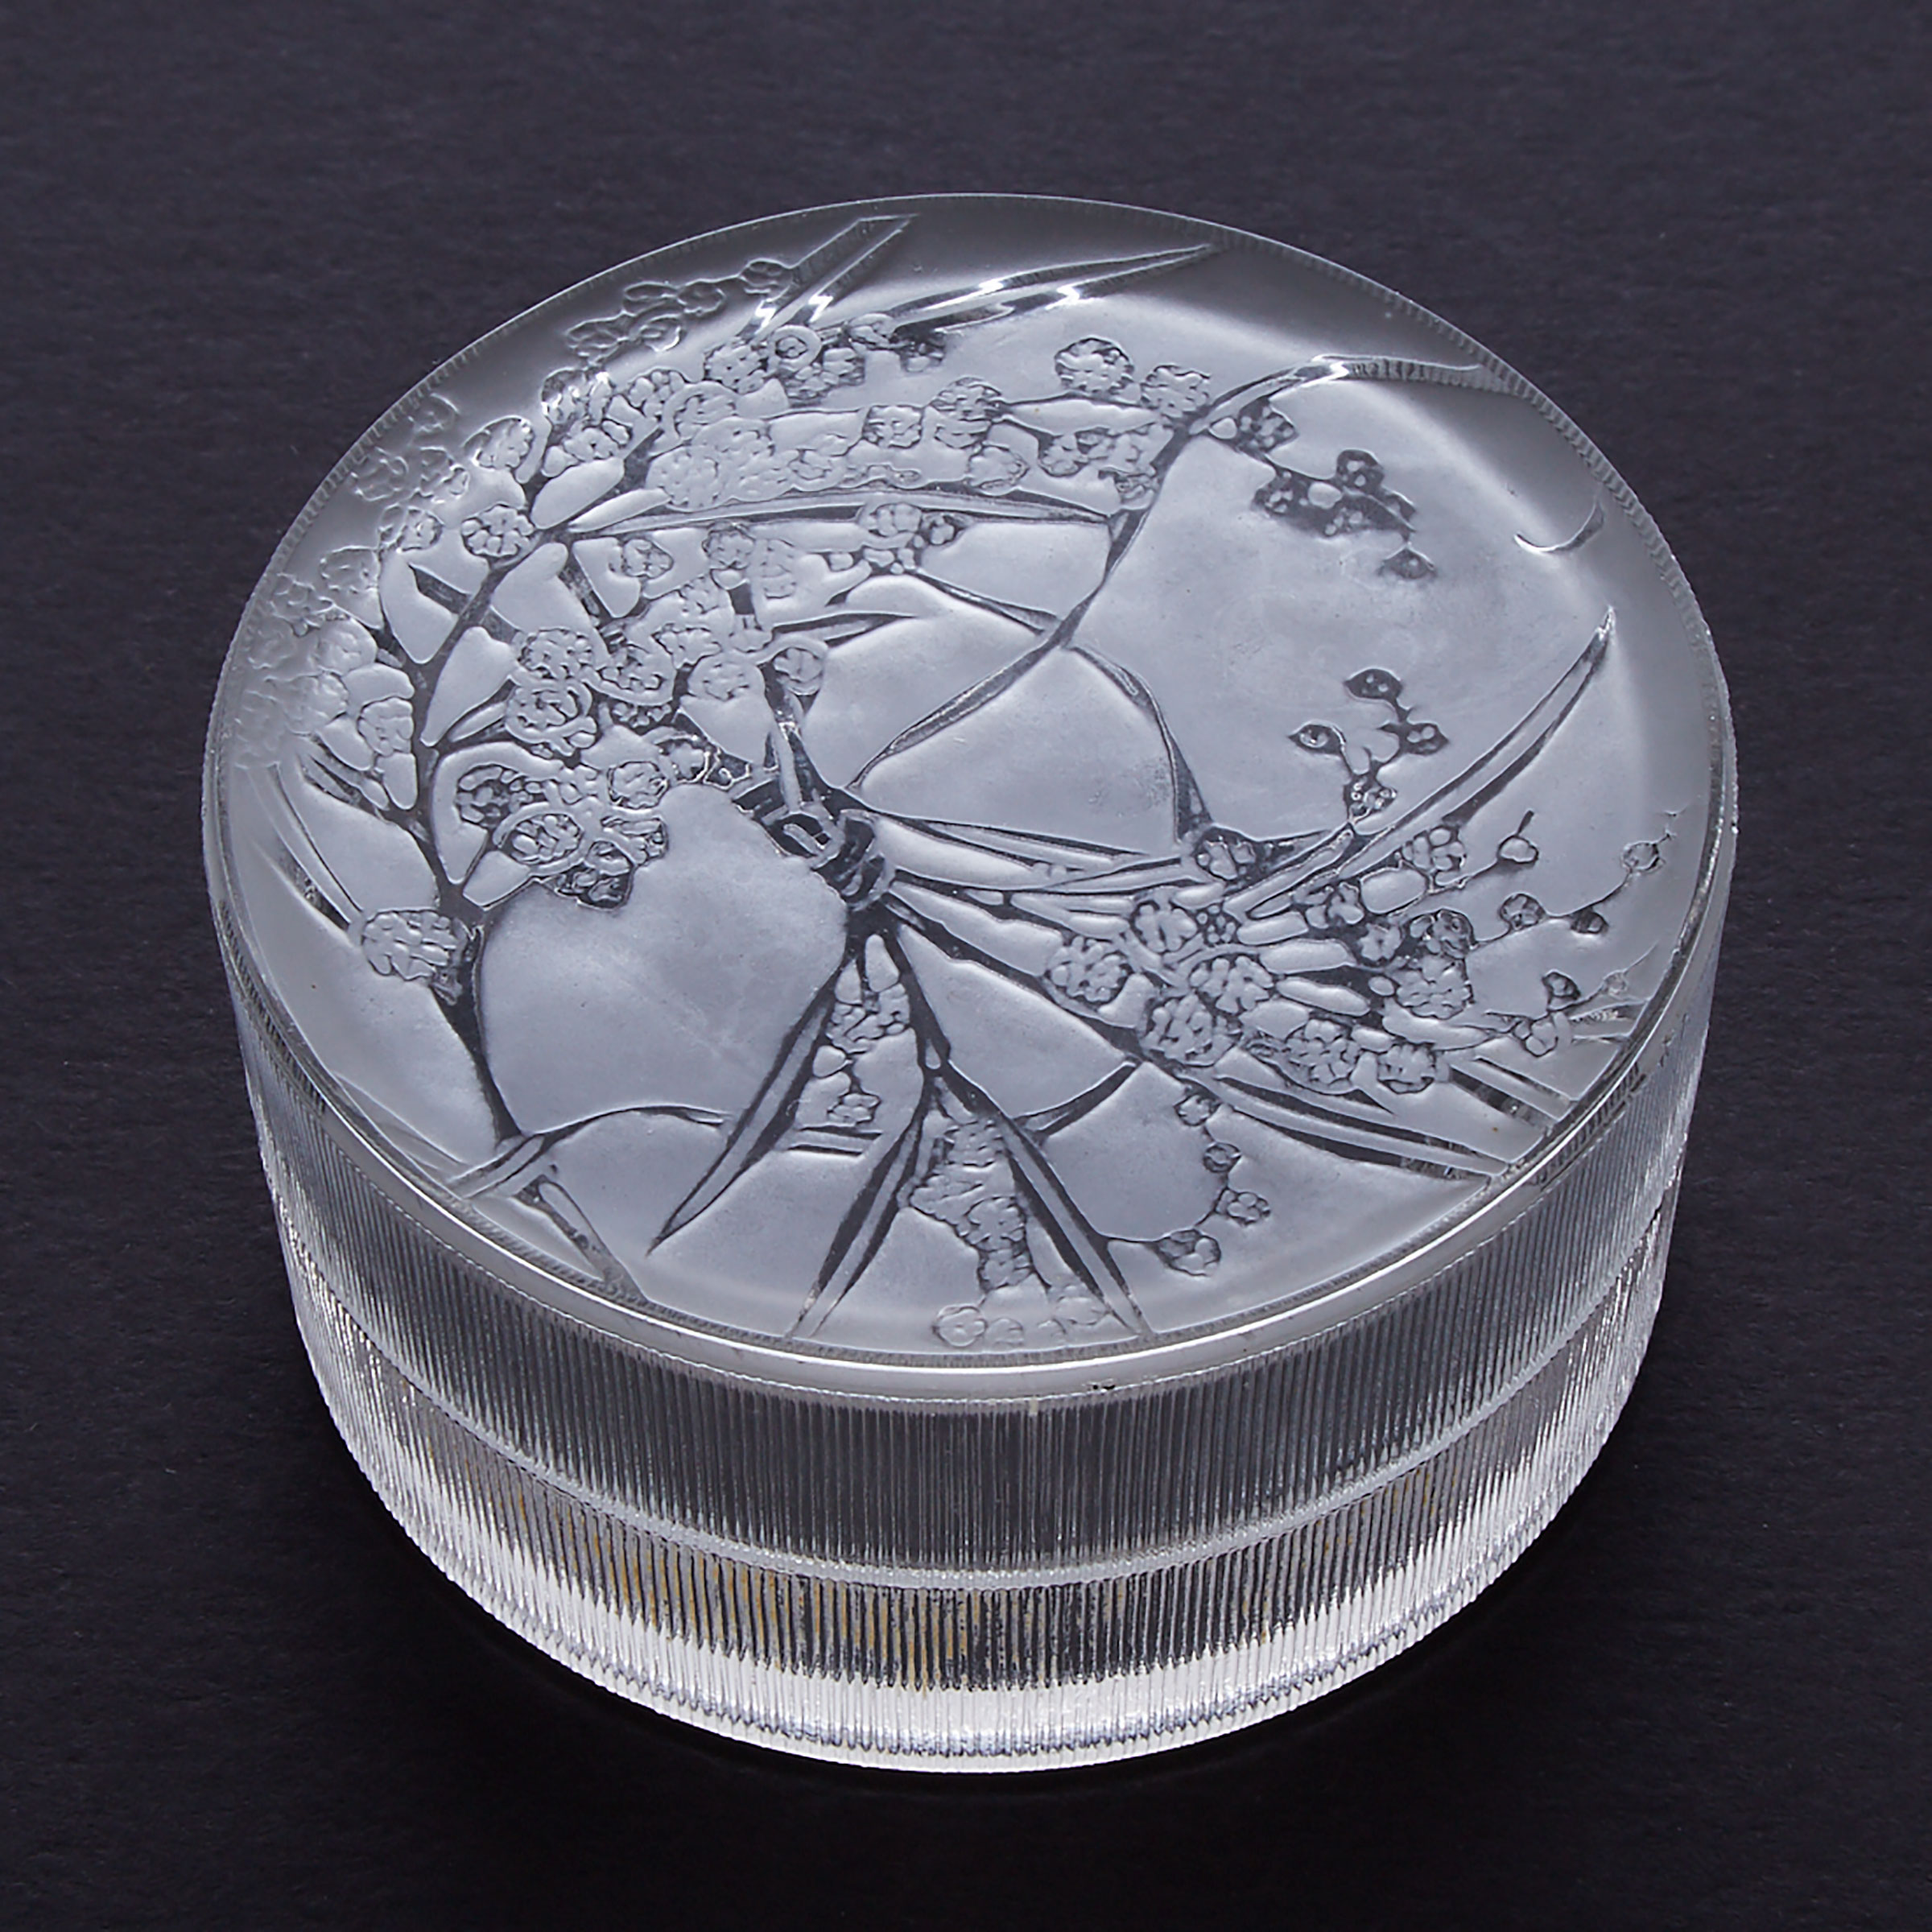 ‘Un Jardin La Nuit’ or ‘Laurier’, Lalique Moulded and Partly Frosted Glass Covered Box, c.1920